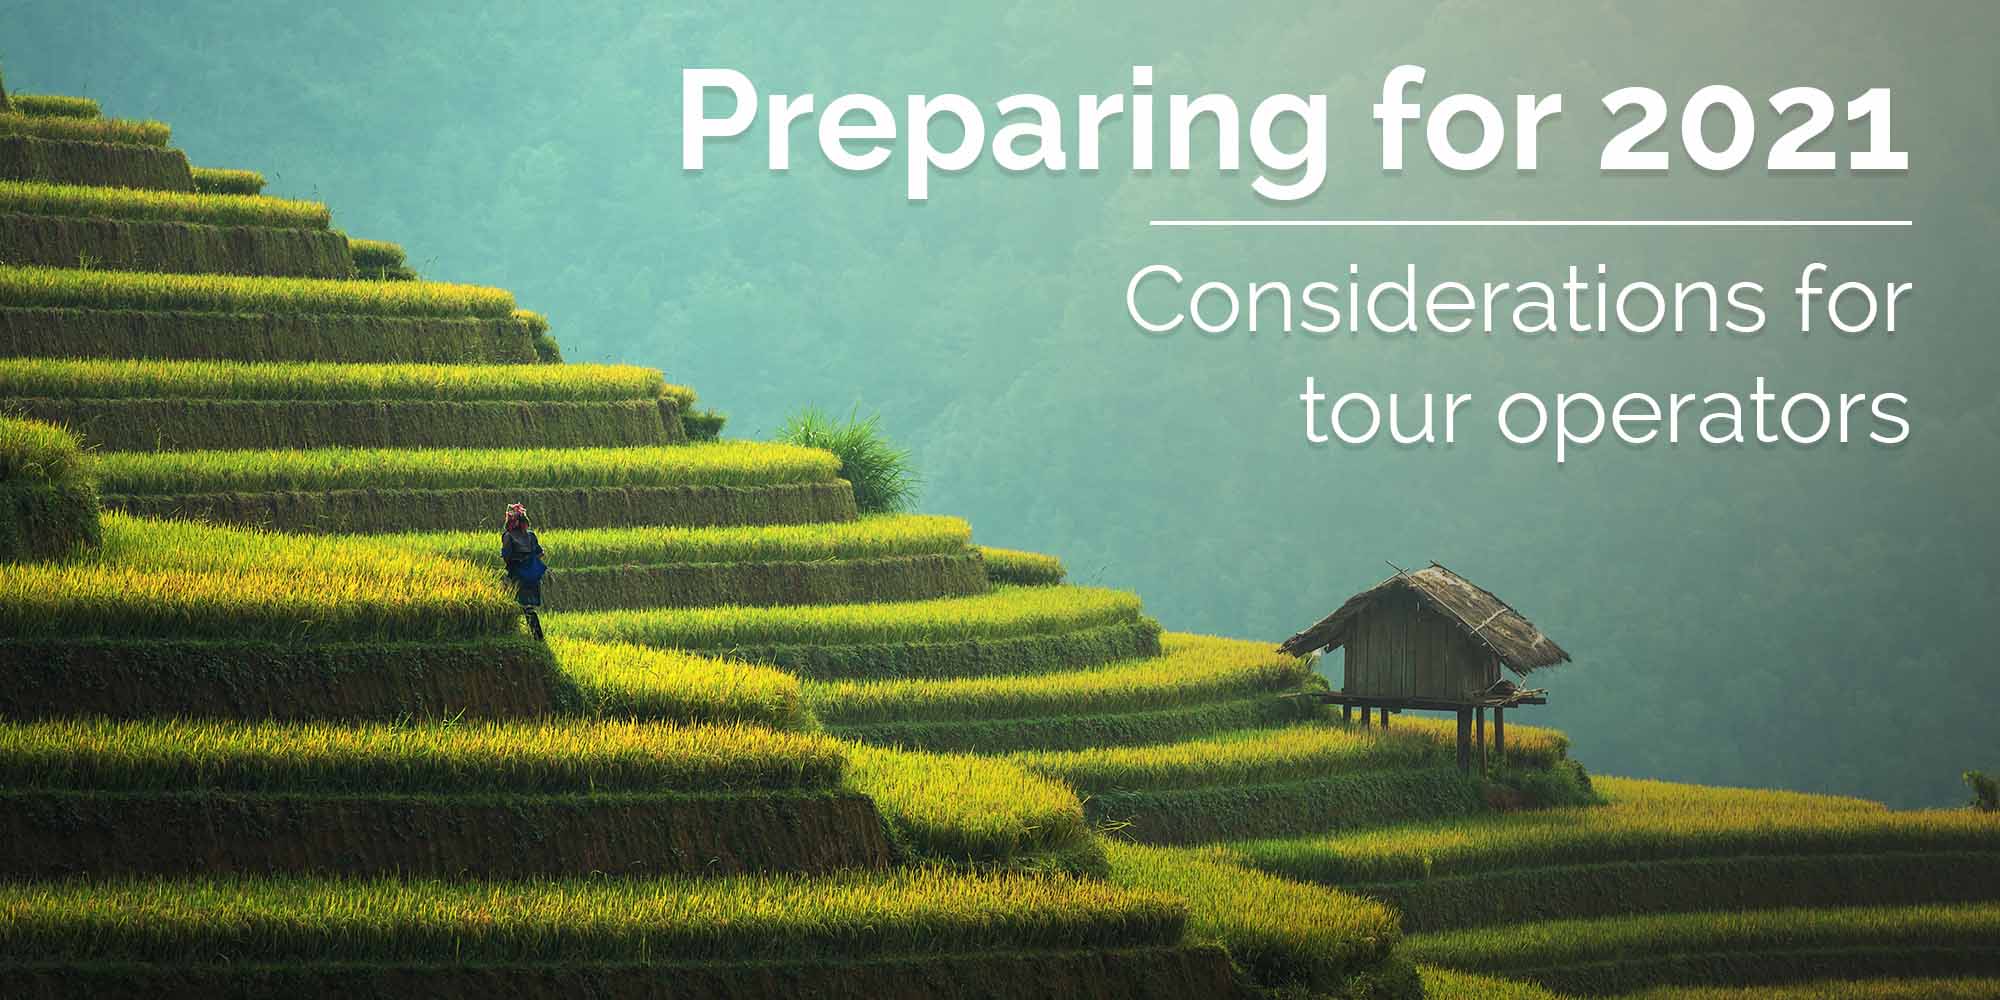 What tour operators need to do to prepare for 2021